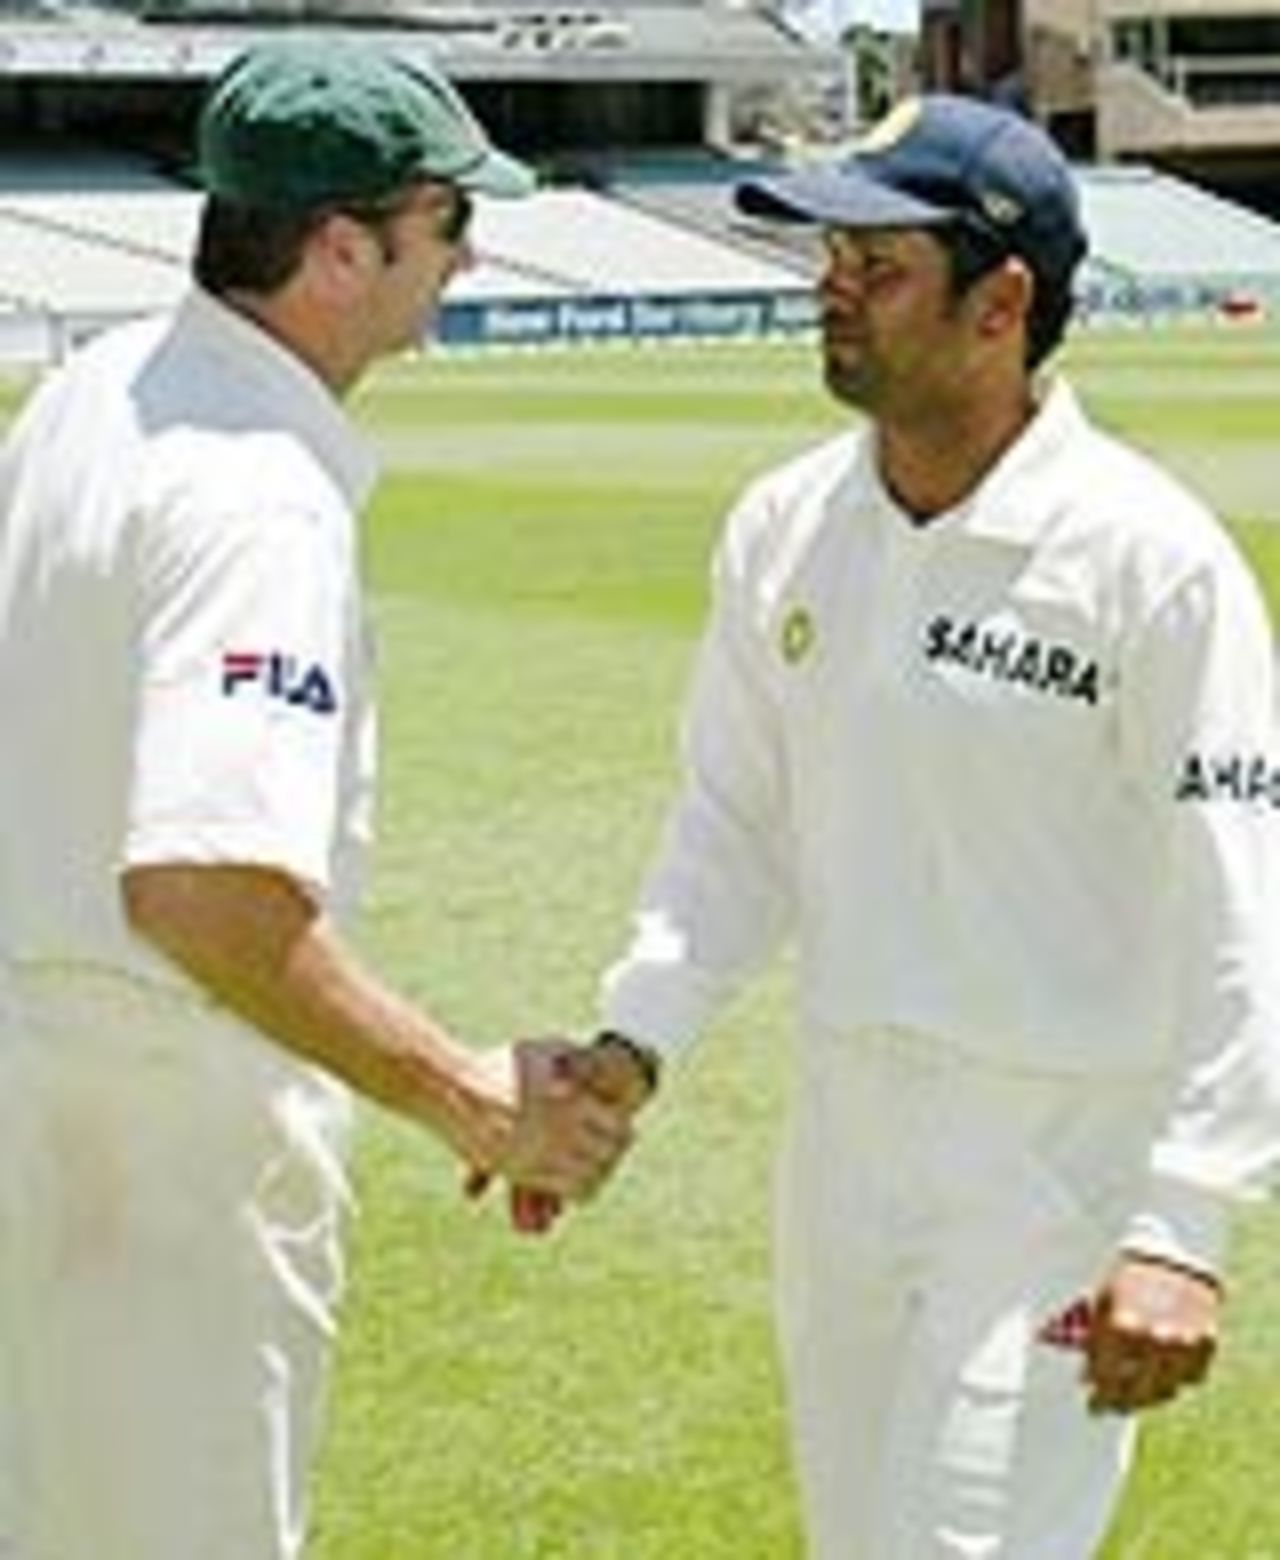 Steve Waugh commiserates with a disappointed Sachin Tendulkar, Australia v India, 3rd Test, Melbourne, 5th day